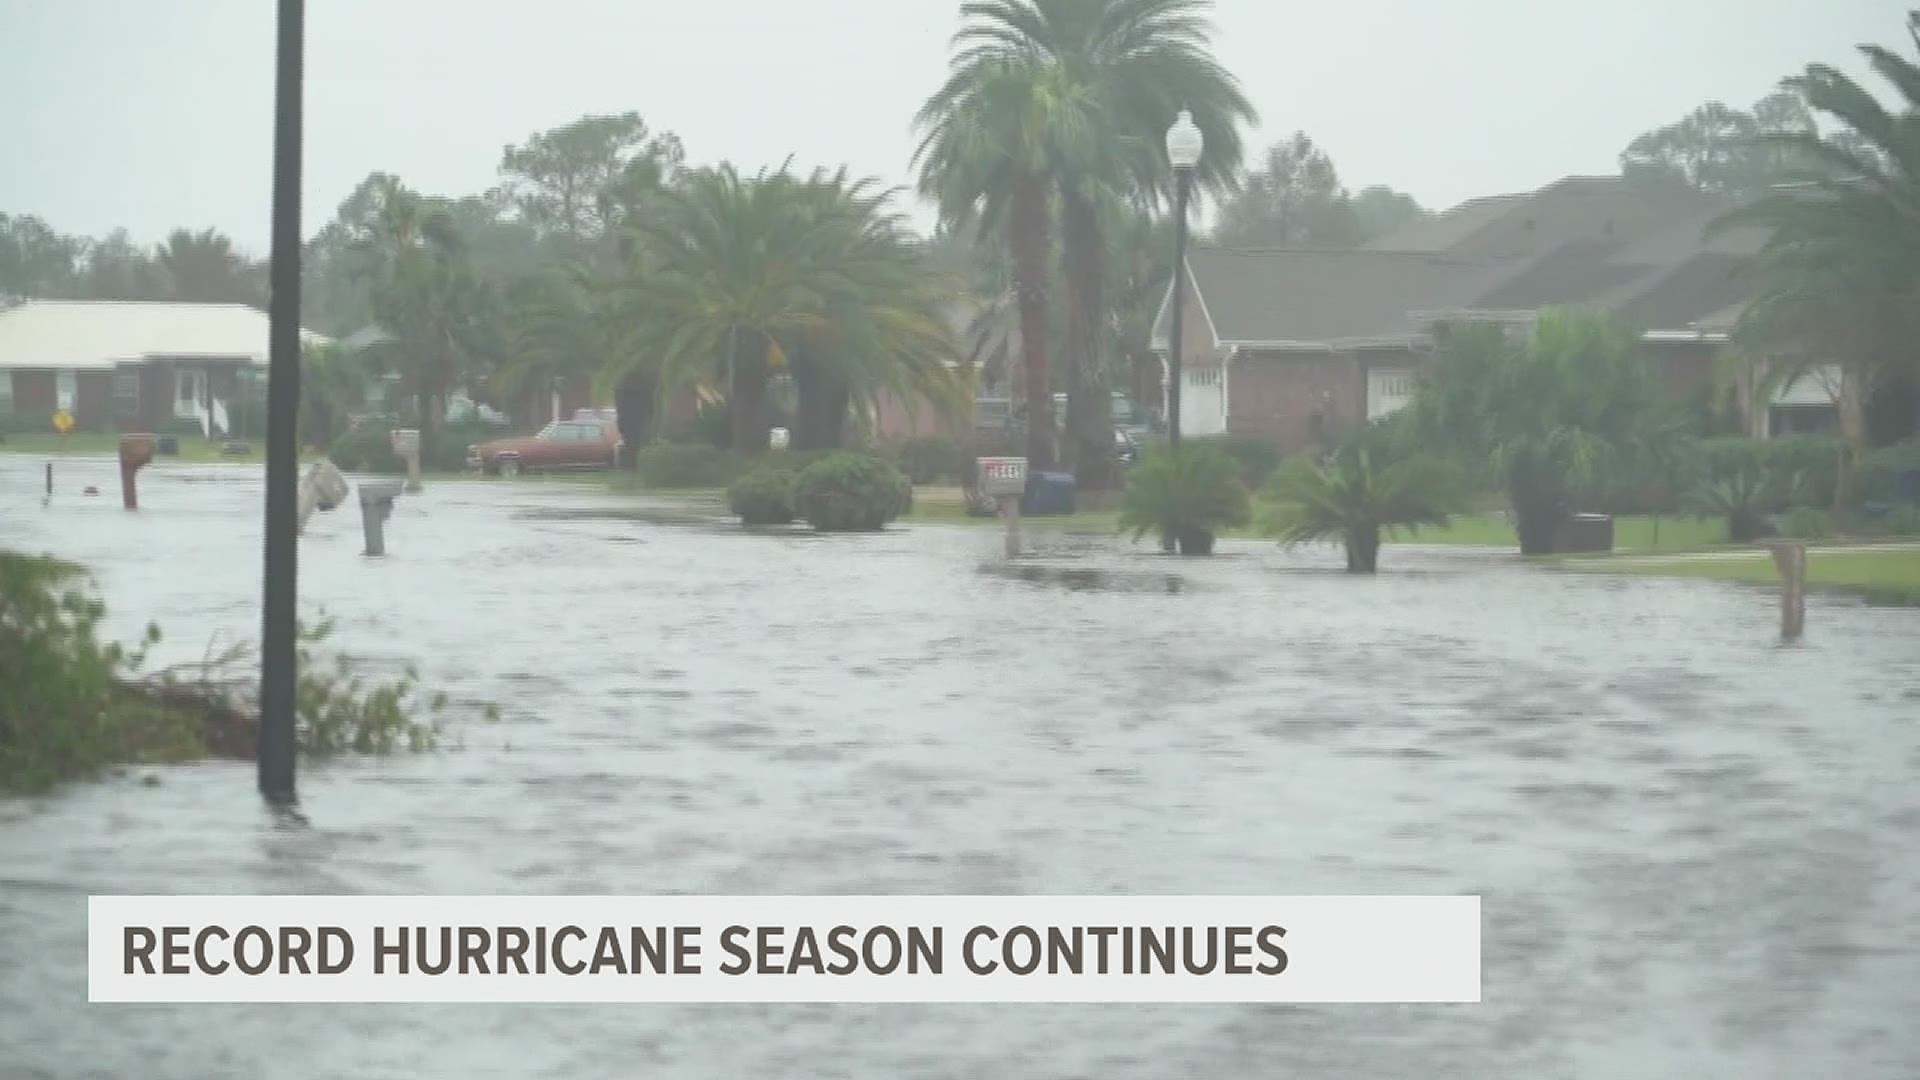 Just past the halfway mark in the 2020 Atlantic hurricane season, it's showing no sign of slowing down to break the record of most storms ever in a season.